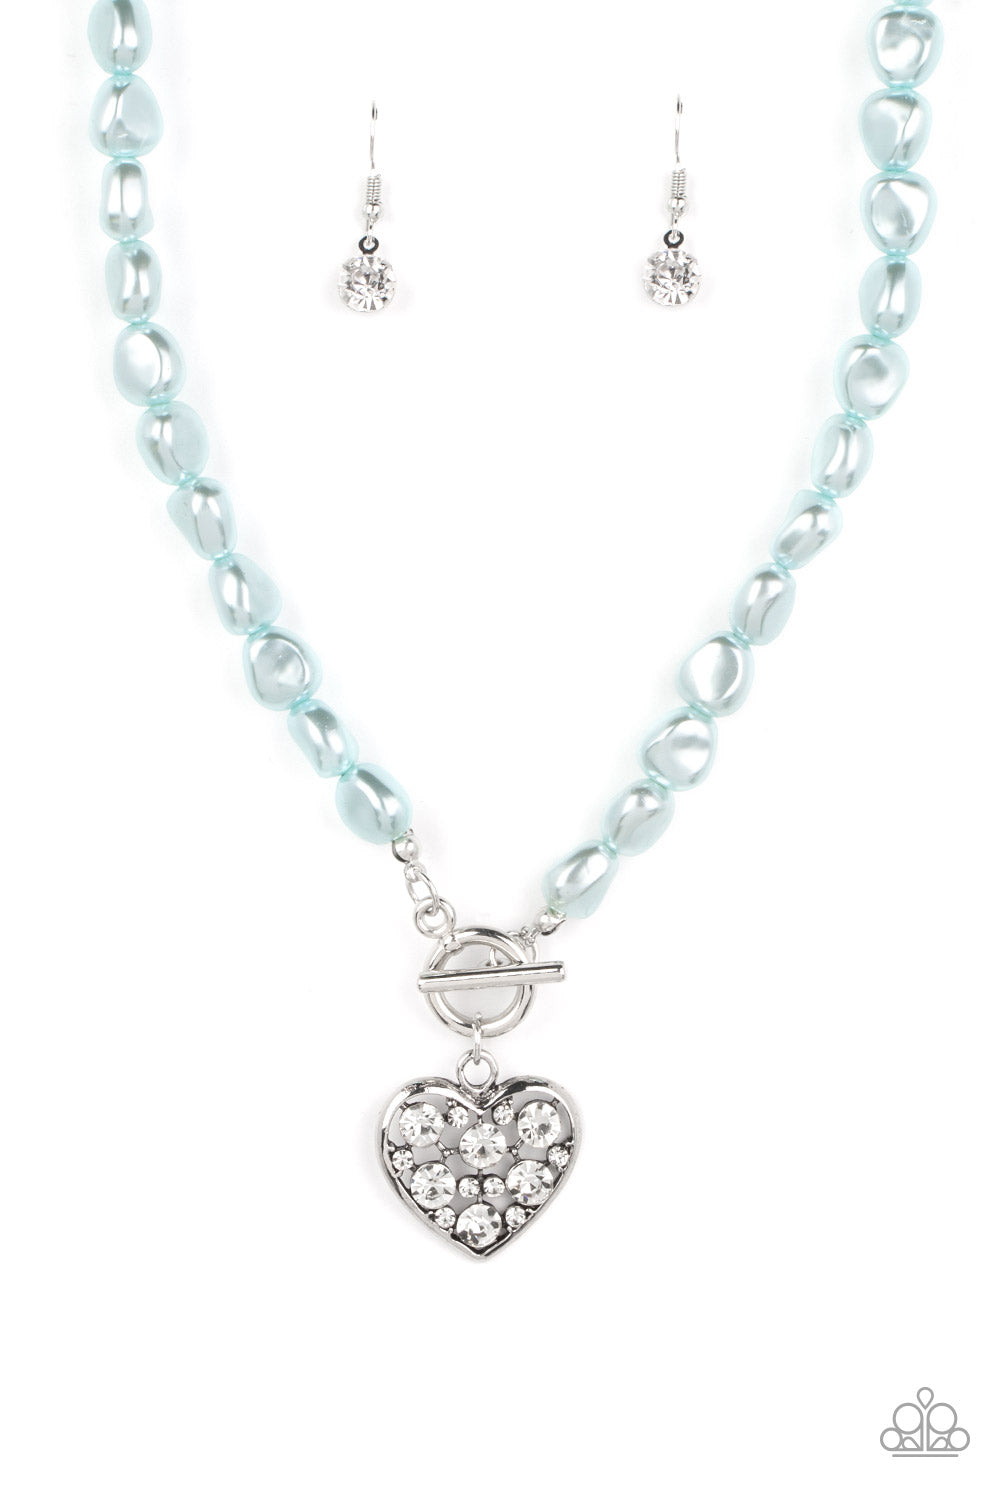 Paparazzi Accessories Color Me Smitten - Blue An imperfect collection of pearly blue beads are threaded along an invisible wire below the collar, creating a colorful display. Dotted in glittery white rhinestones, an airy silver heart pendant sparkles at t